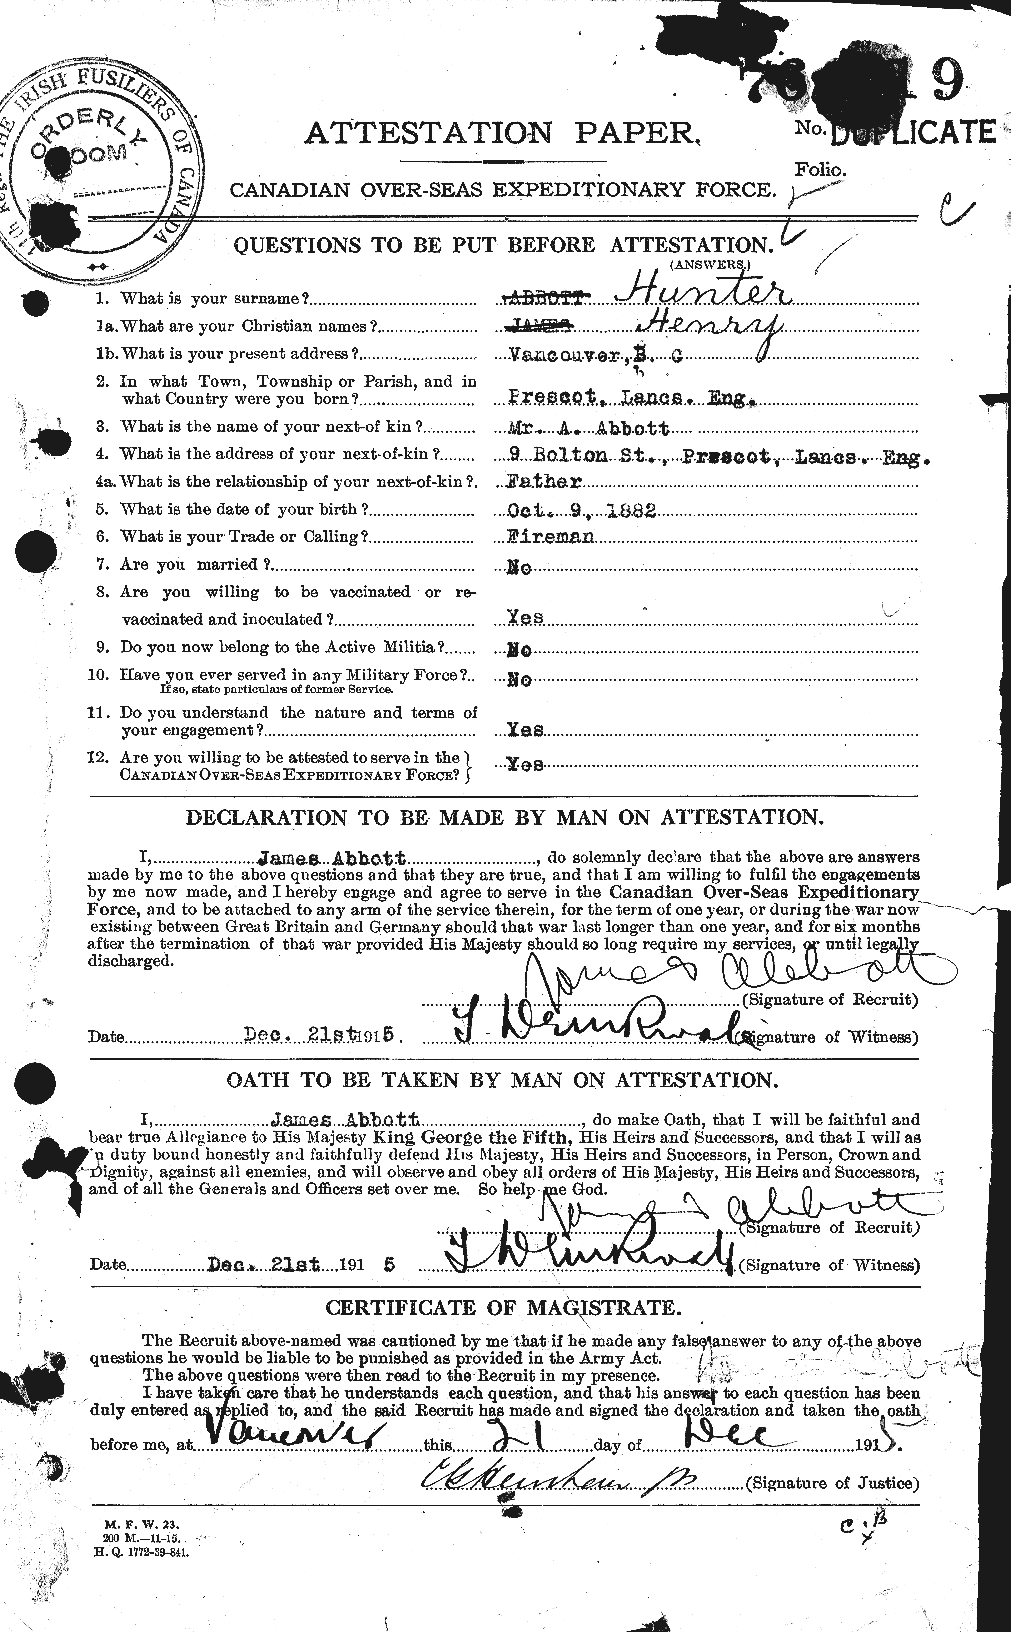 Personnel Records of the First World War - CEF 409190a